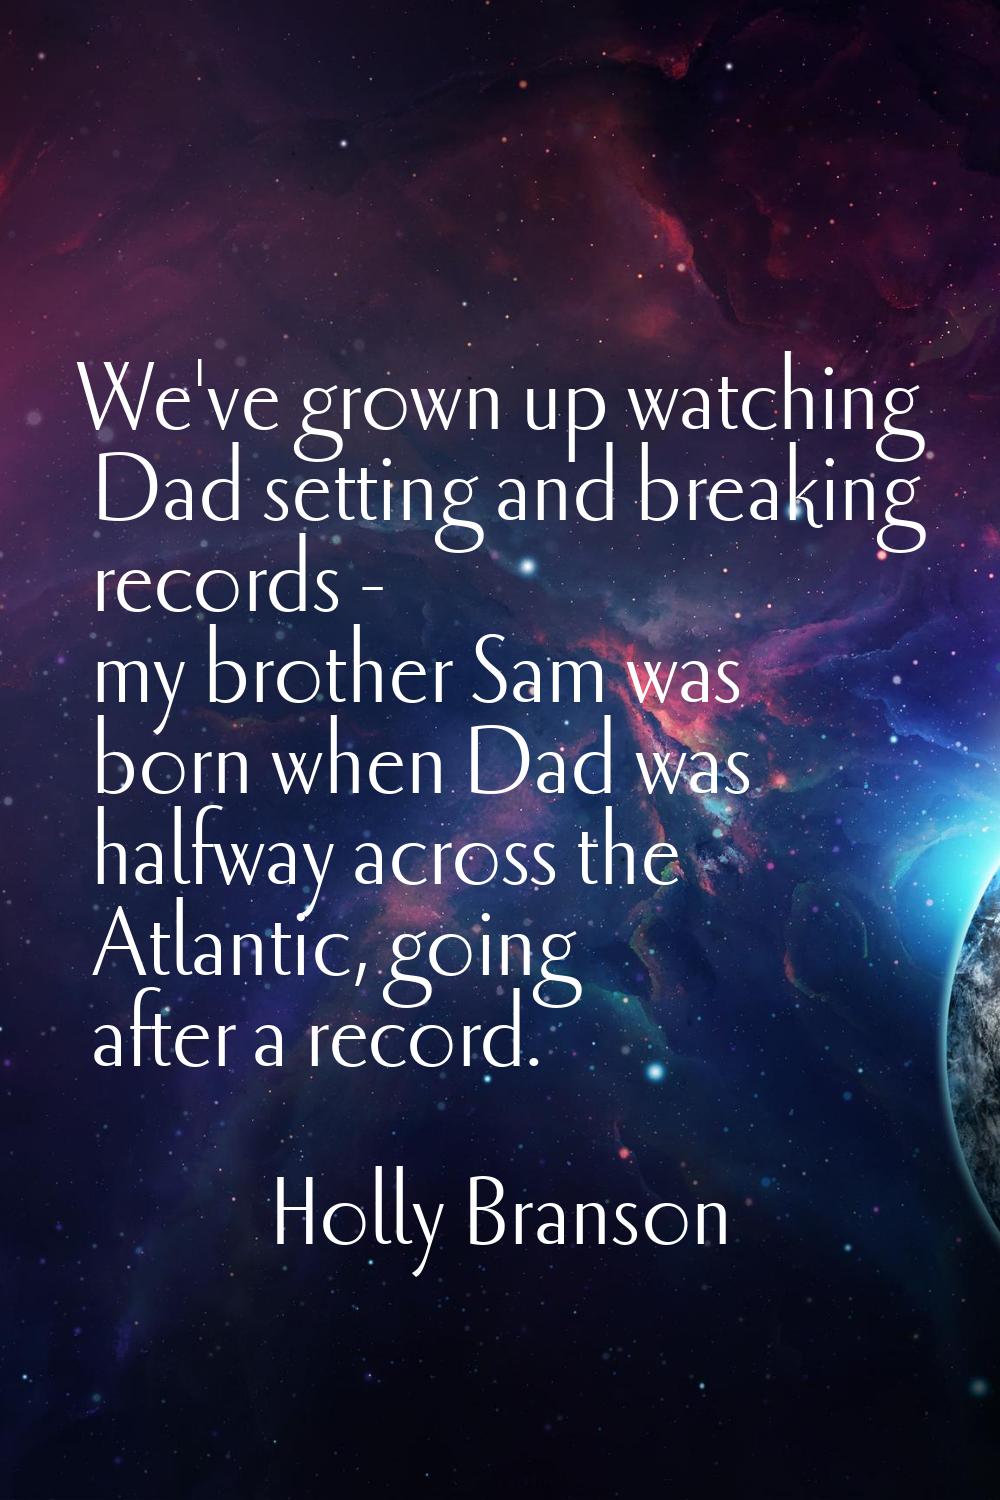 We've grown up watching Dad setting and breaking records - my brother Sam was born when Dad was hal